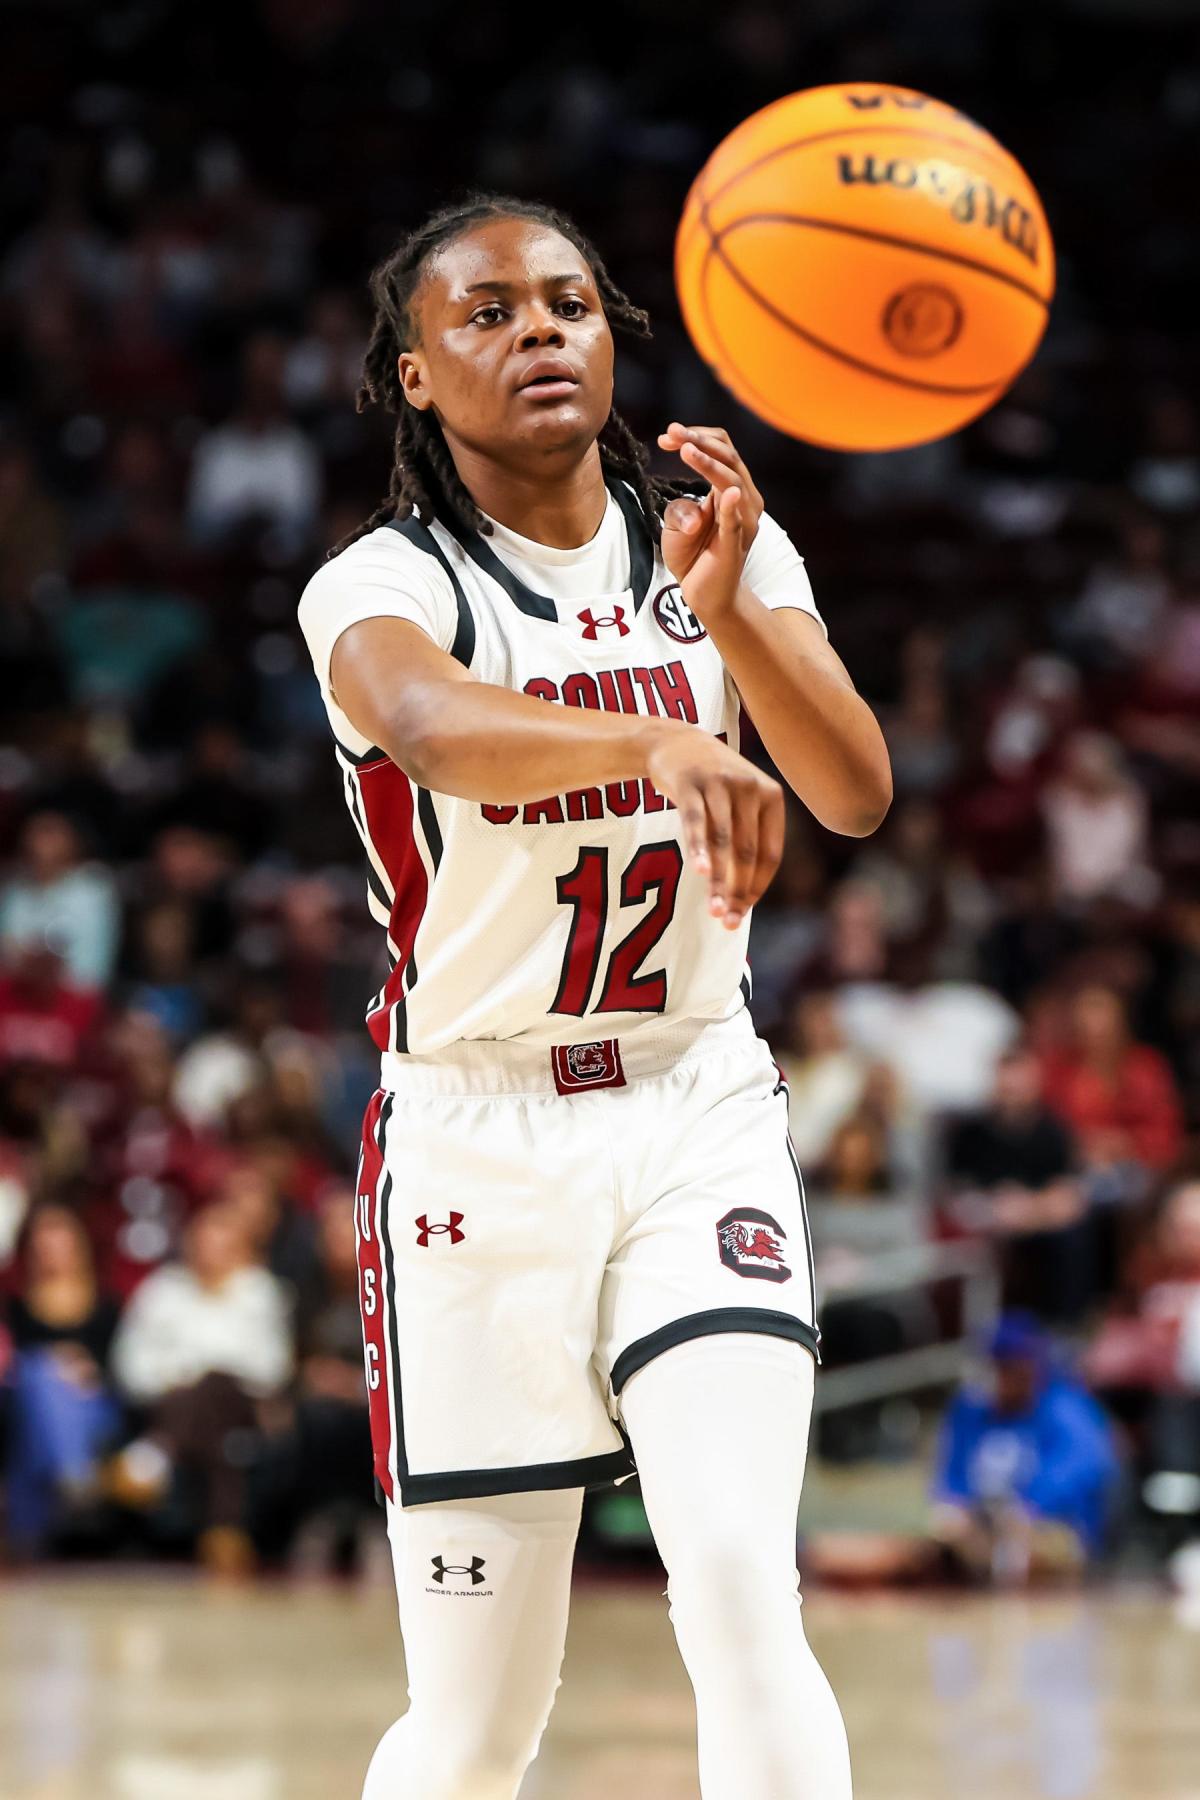 Milaysia Fulwiley Leads South Carolina Womens Basketball In 99 29 Rout Of Presbyterian Yahoo 